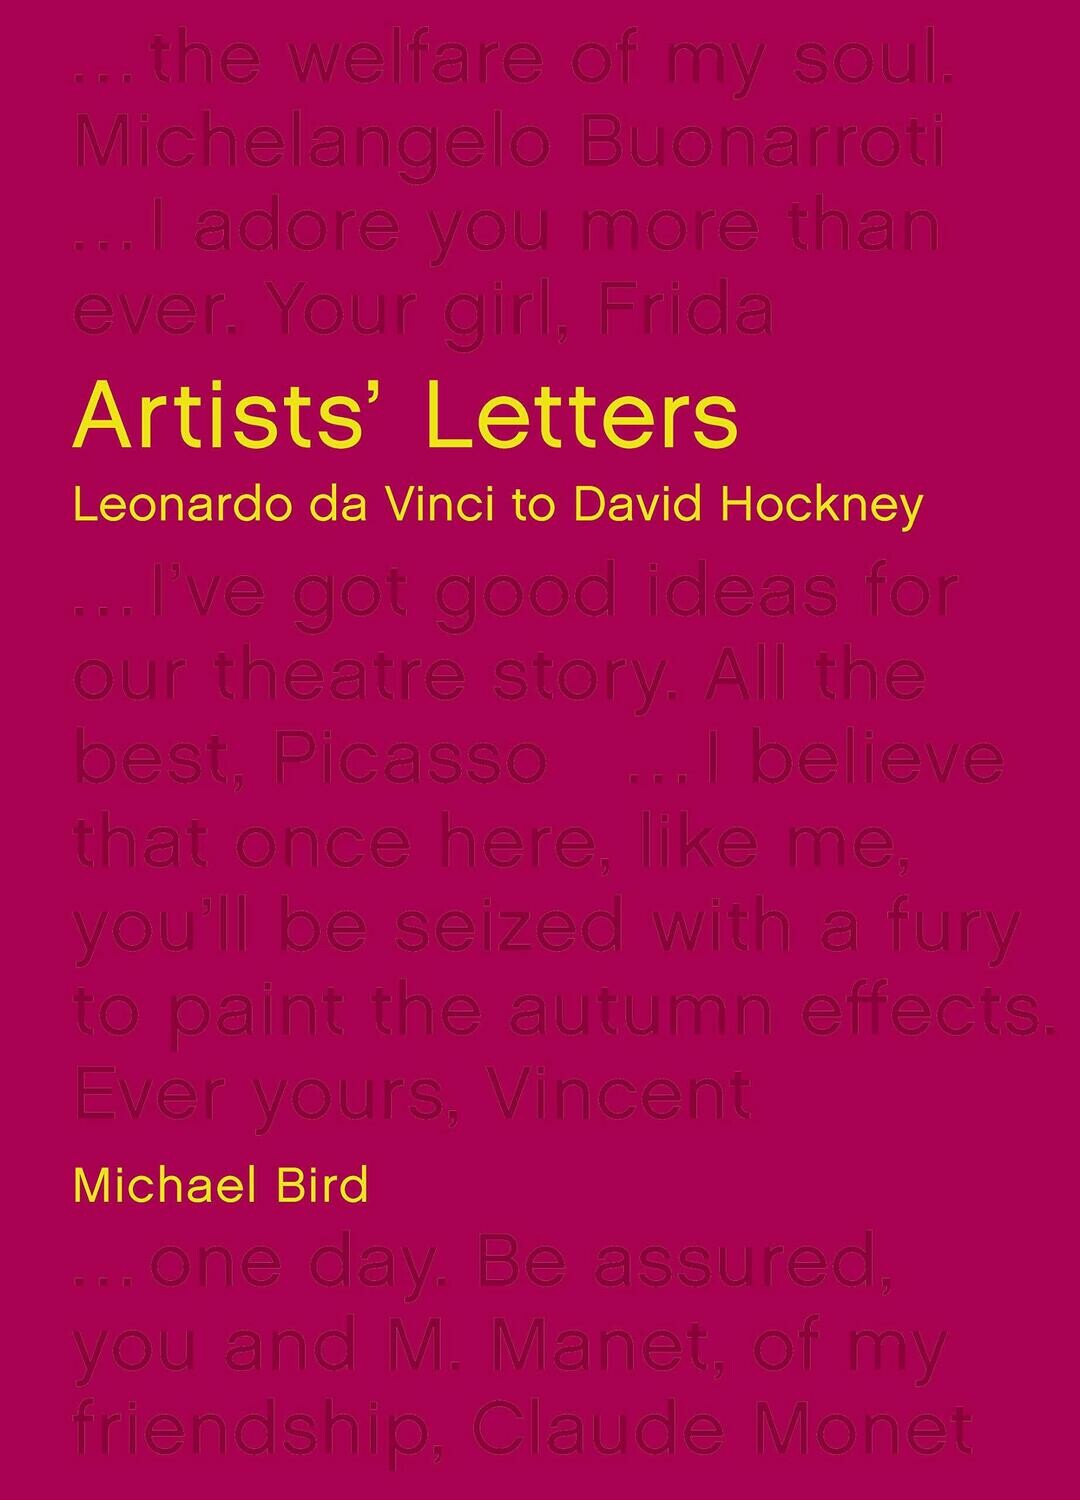 Artists' Letters by Michael Bird